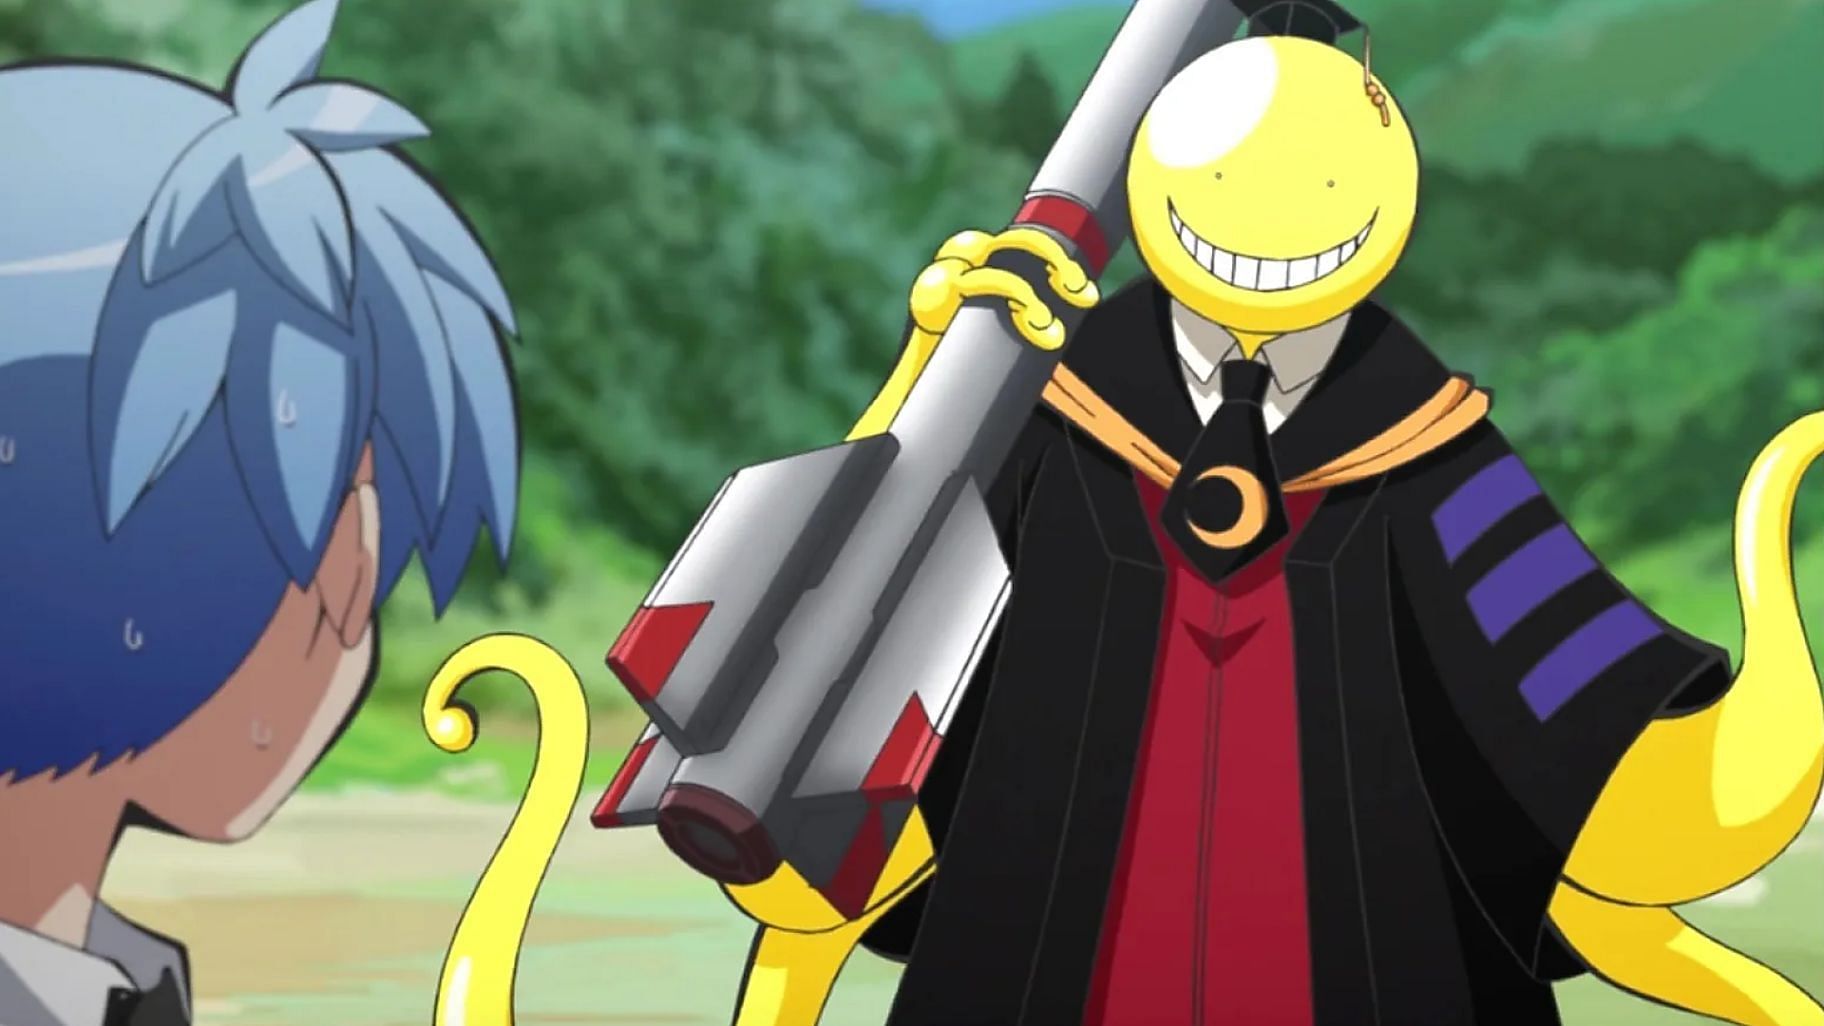 Koro Sensei is a candidate for the strongest anime character title (Image via Lerche)